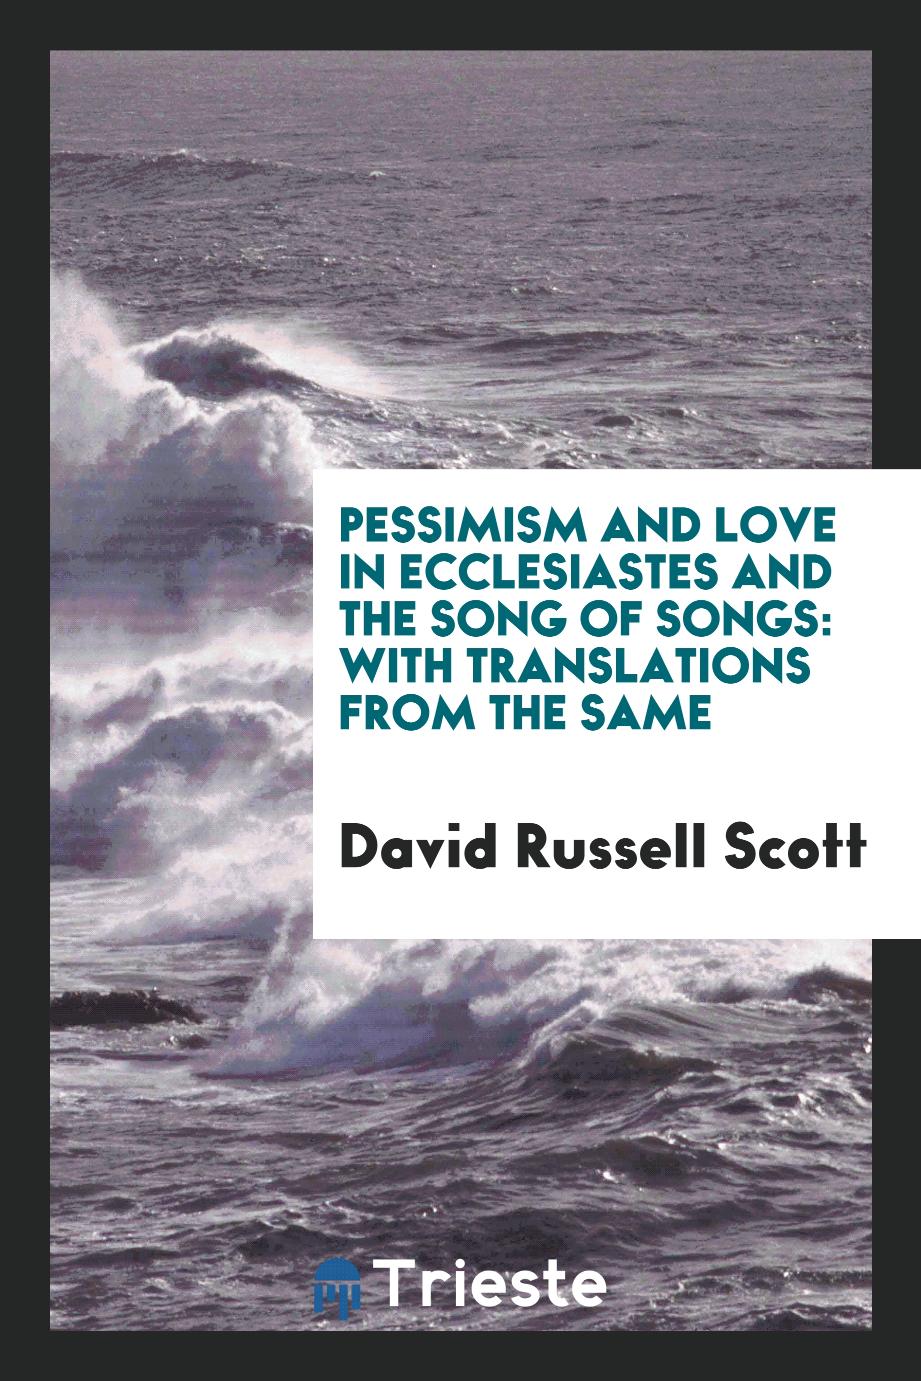 Pessimism and love in Ecclesiastes and the Song of Songs: With translations from the same